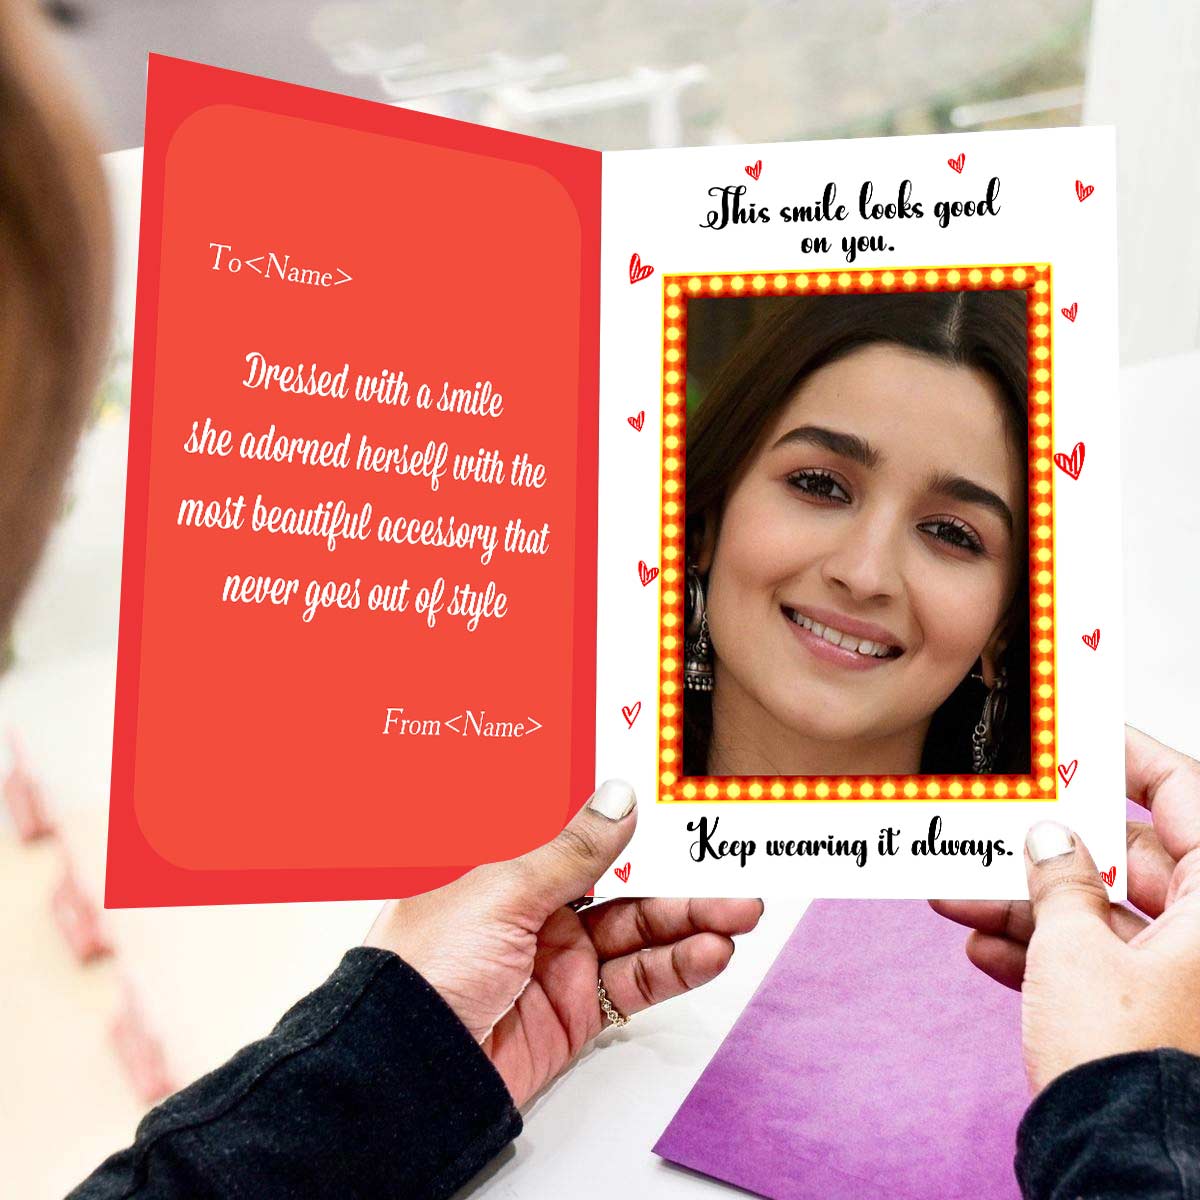 Smile Before You Open Mirror Greeting Card